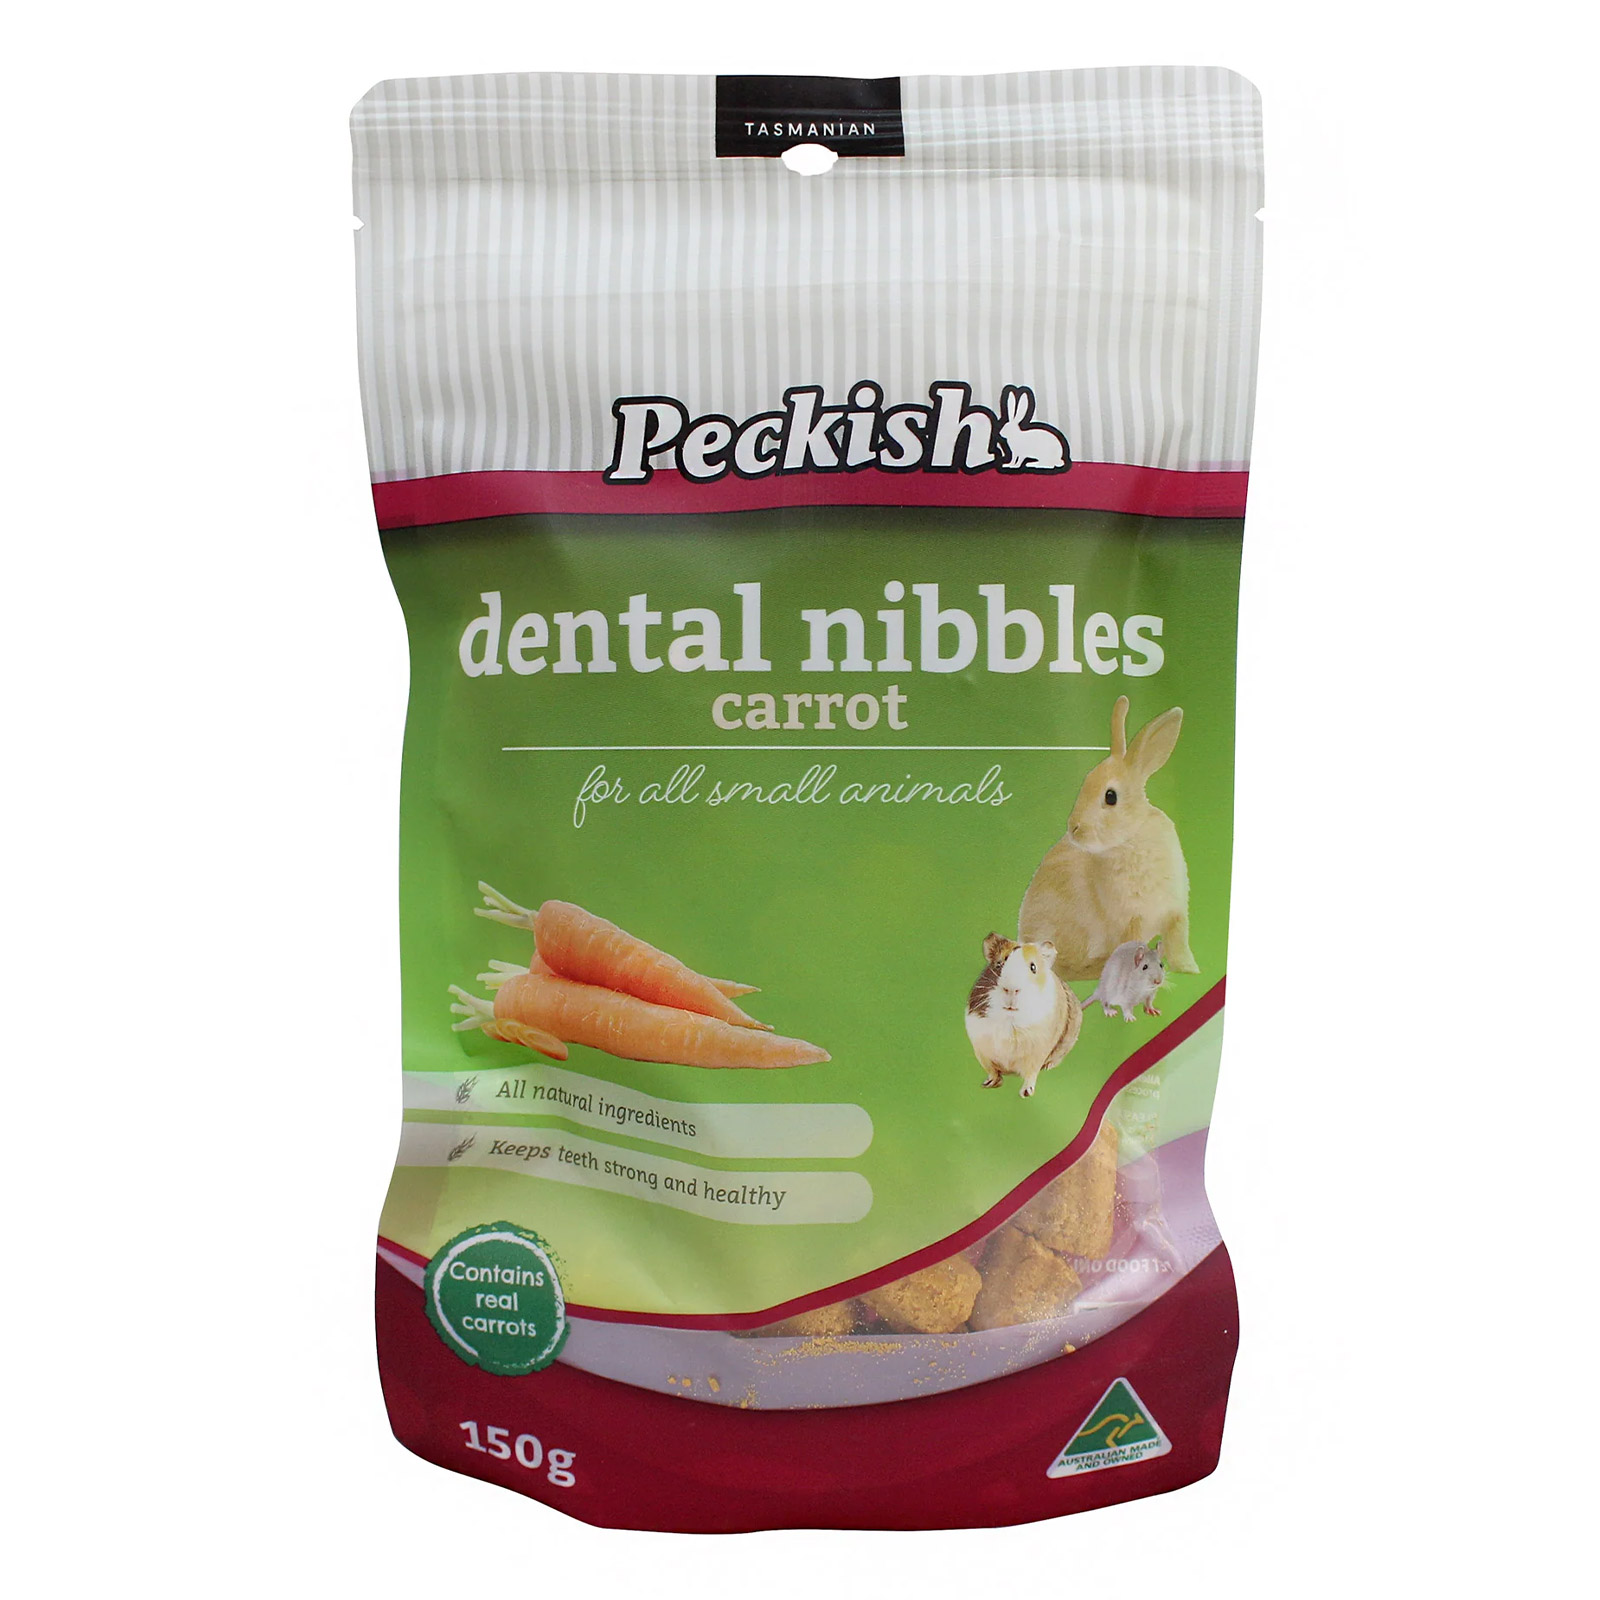 Peckish Dental Nibbles Treats for All Small Animals for Food